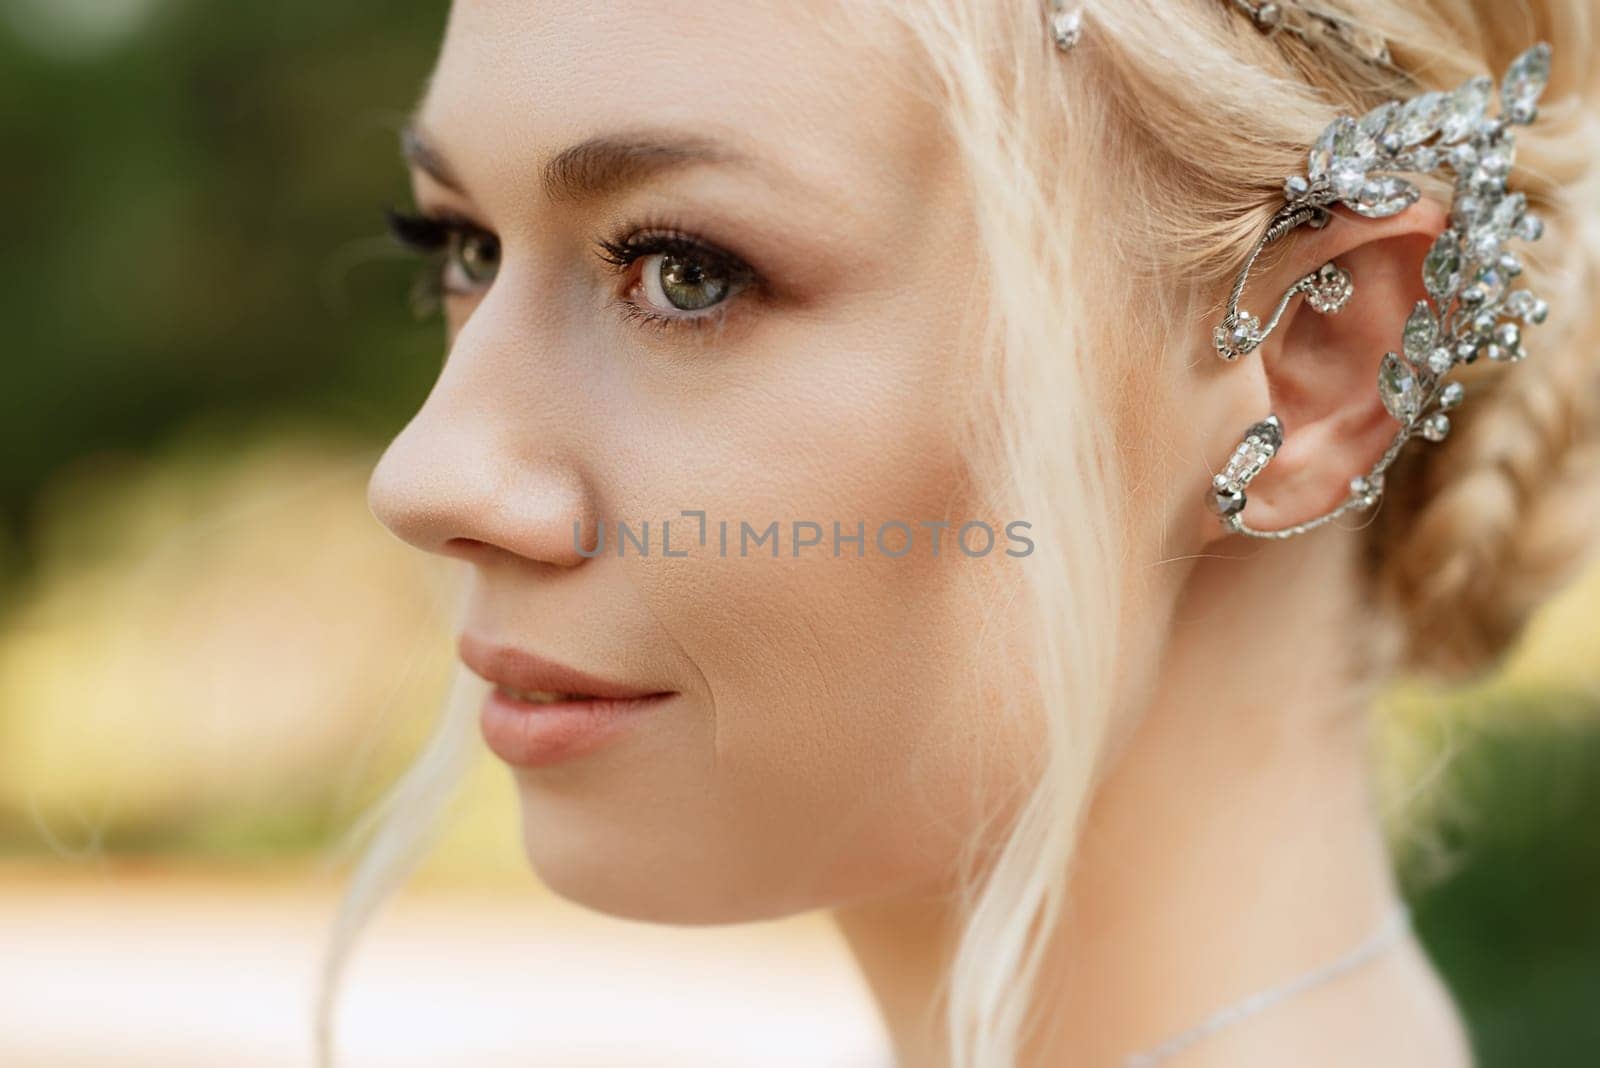 portrait of a happy bride in a light light dress in  wearing elven accessories by Andreua